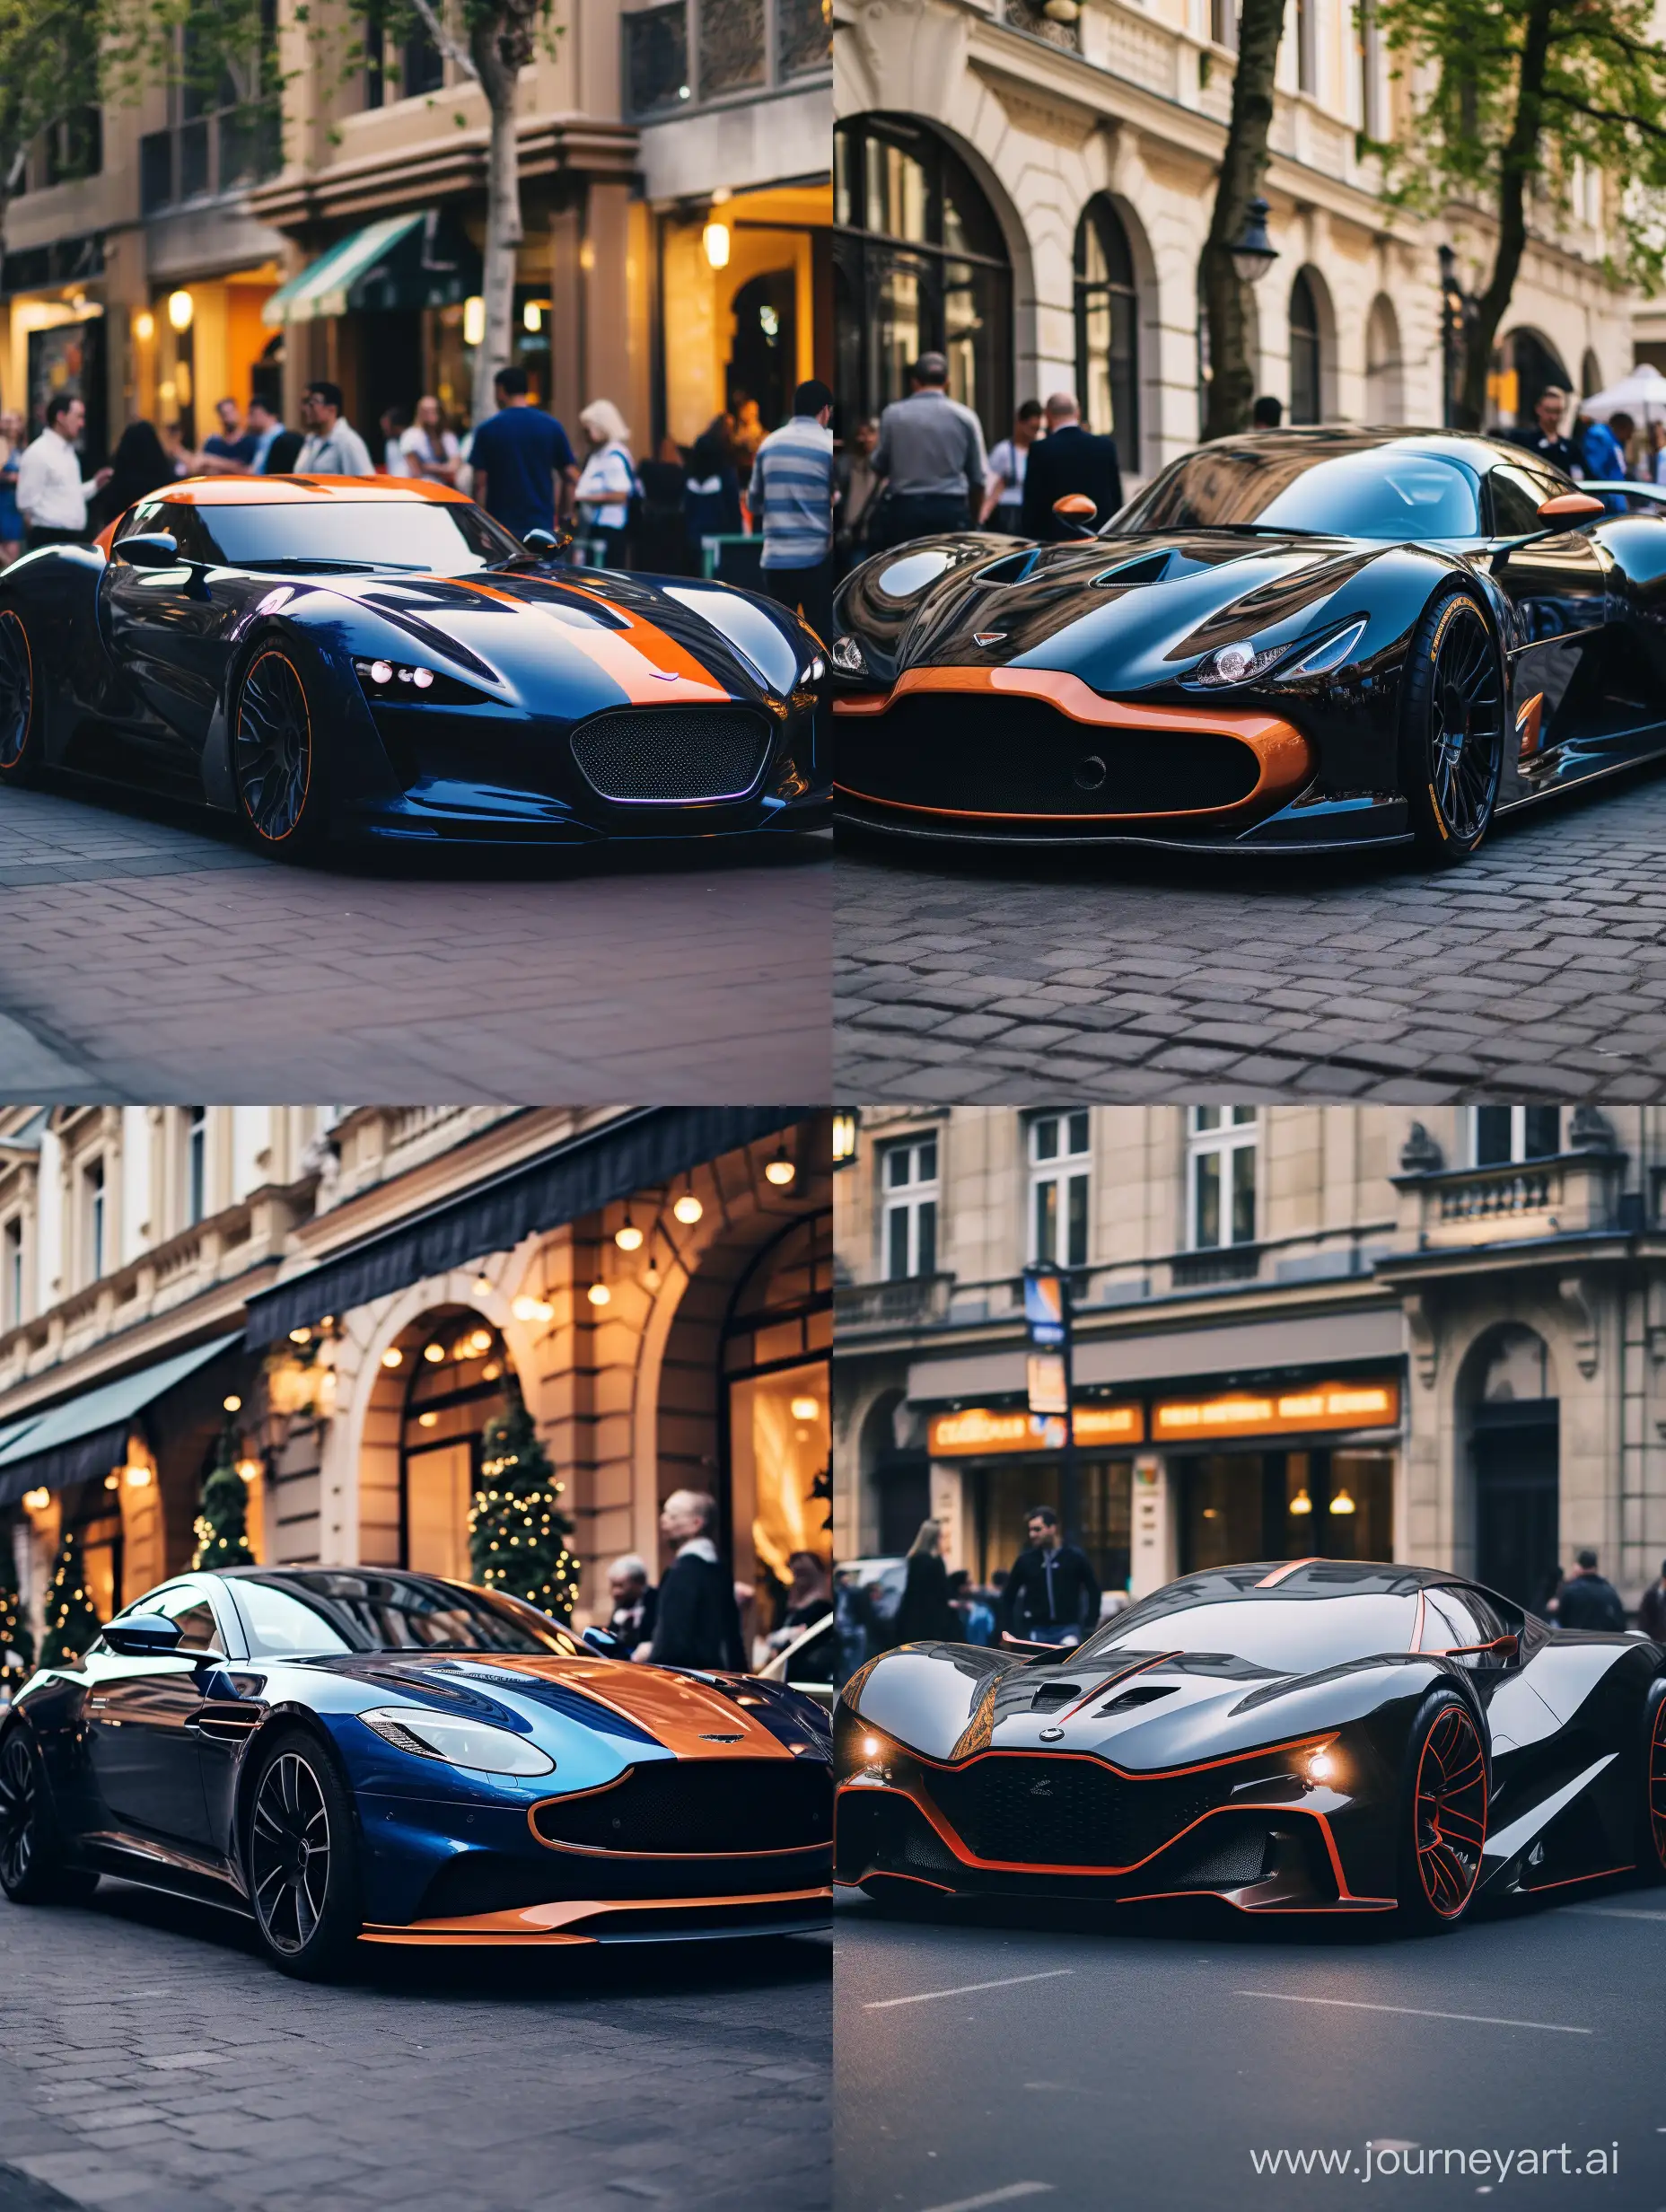 The image features a custom-made, orange and black sports car parked on the street. The vehicle has an eye-catching design with orange wheels and blue lights. It appears to be a one-of-a-kind creation that stands out from typical cars. In addition to the sports car, there is a person visible in the background, but their features are not discernible.